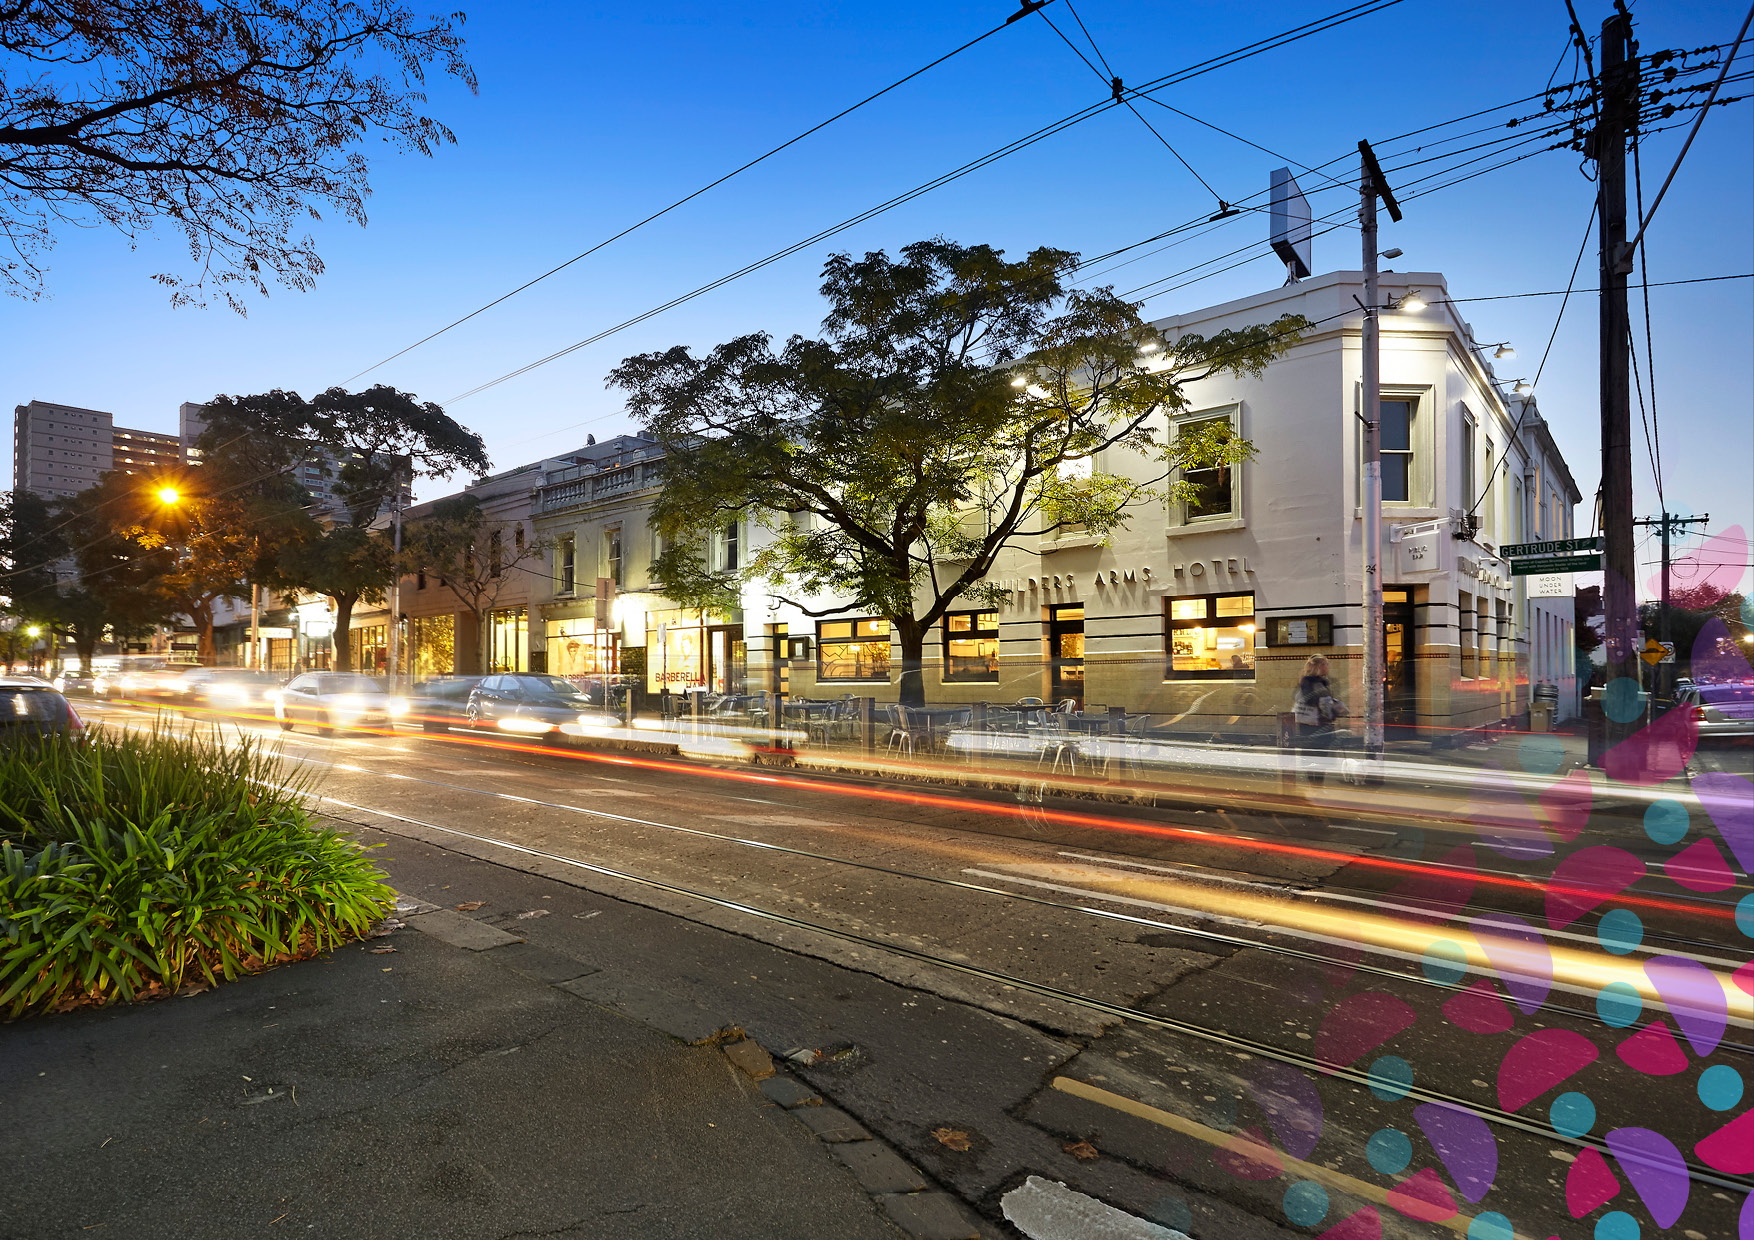 Sold 211 Gertrude Street Fitzroy Retail Commercial Real Estate